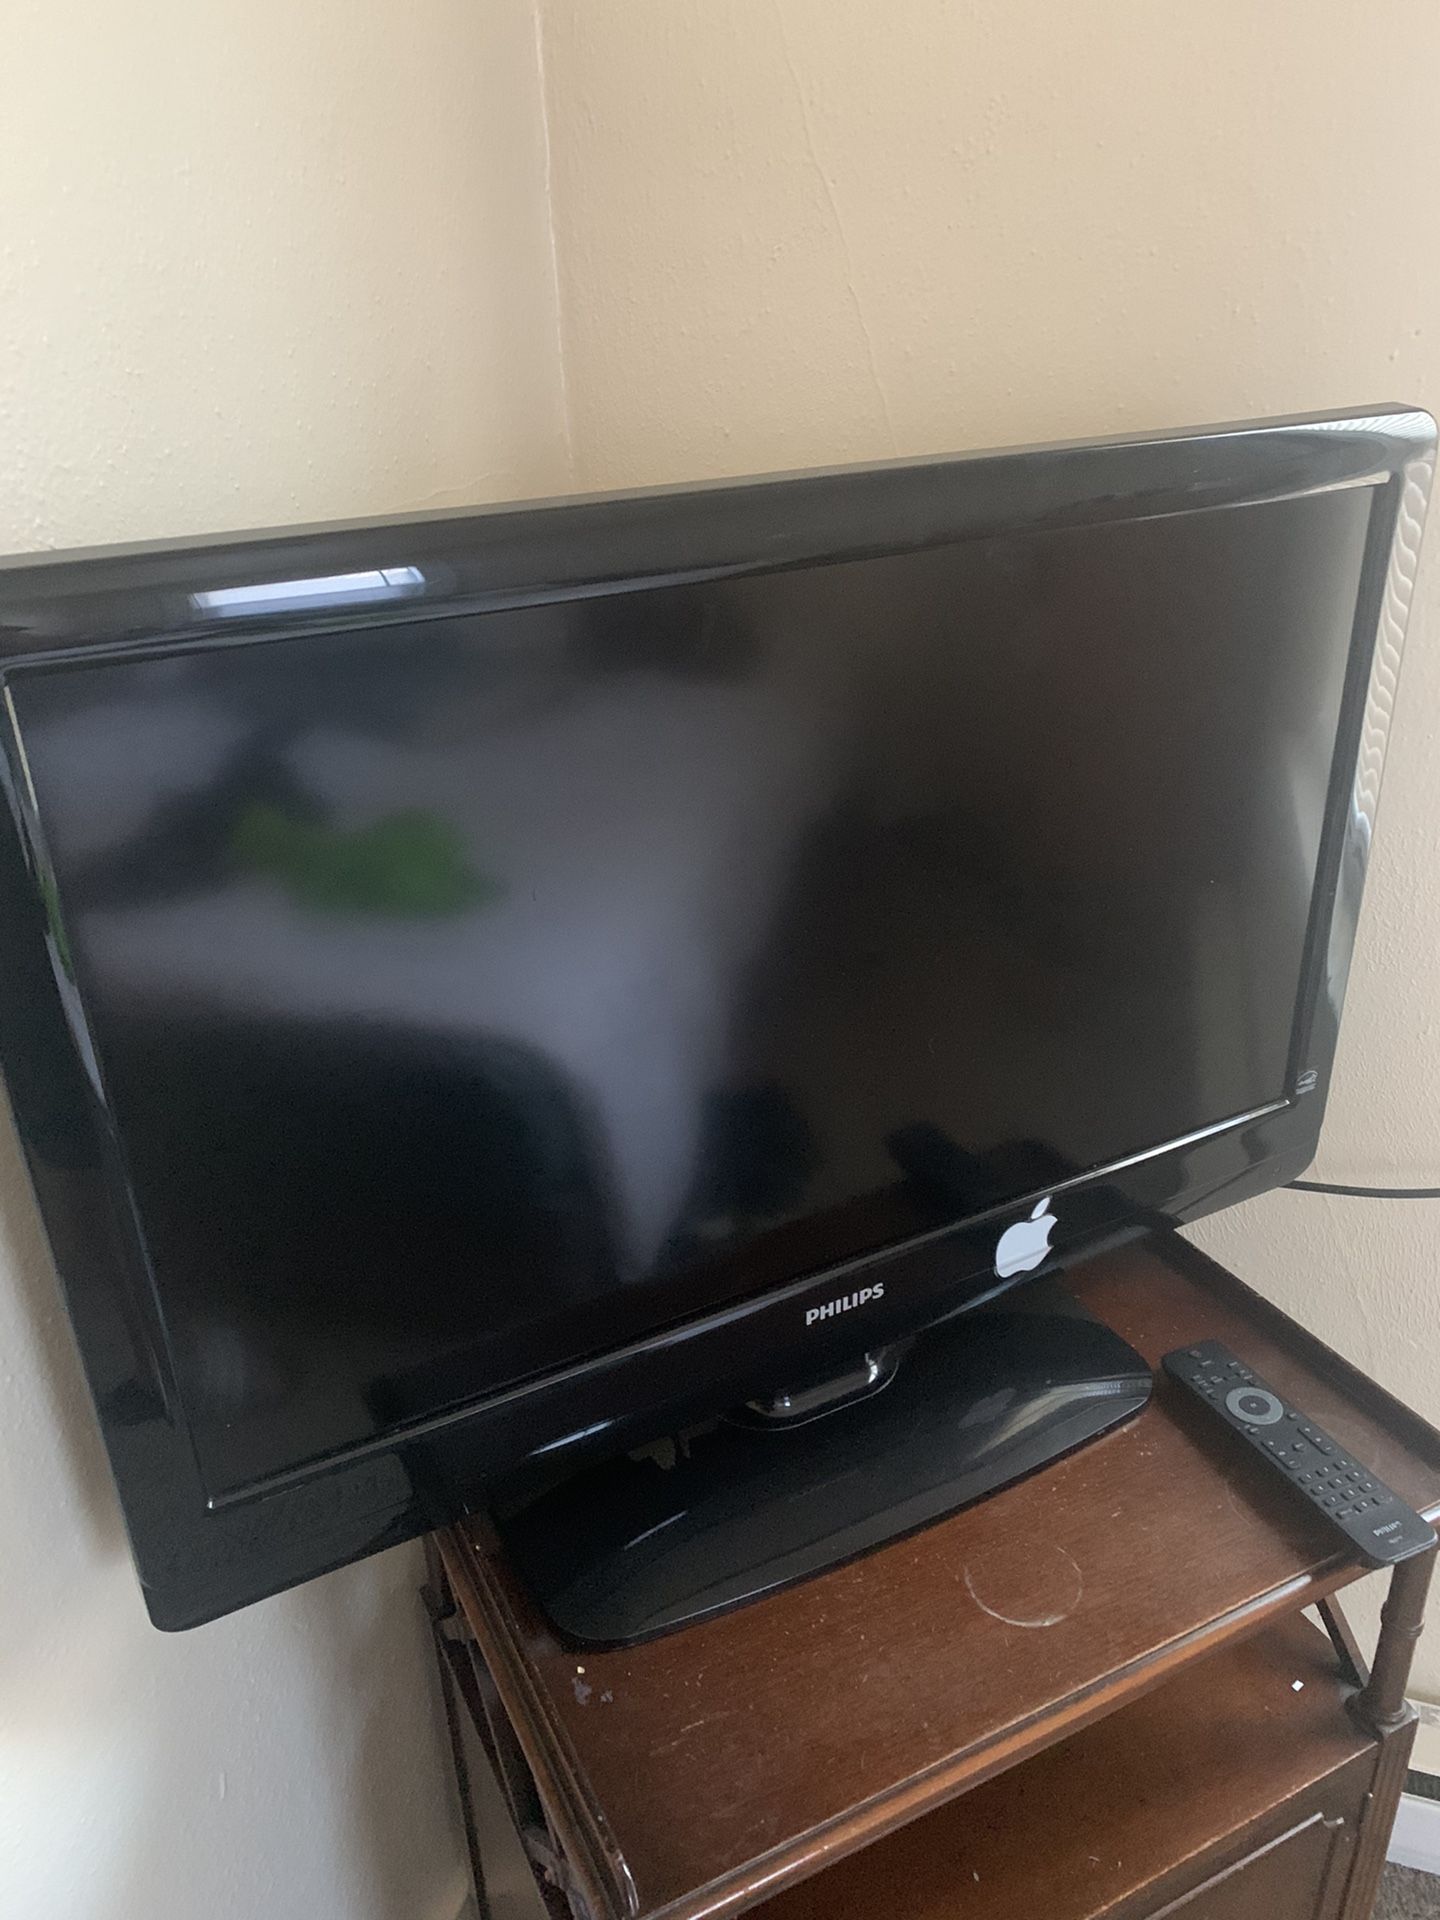 LCD Television